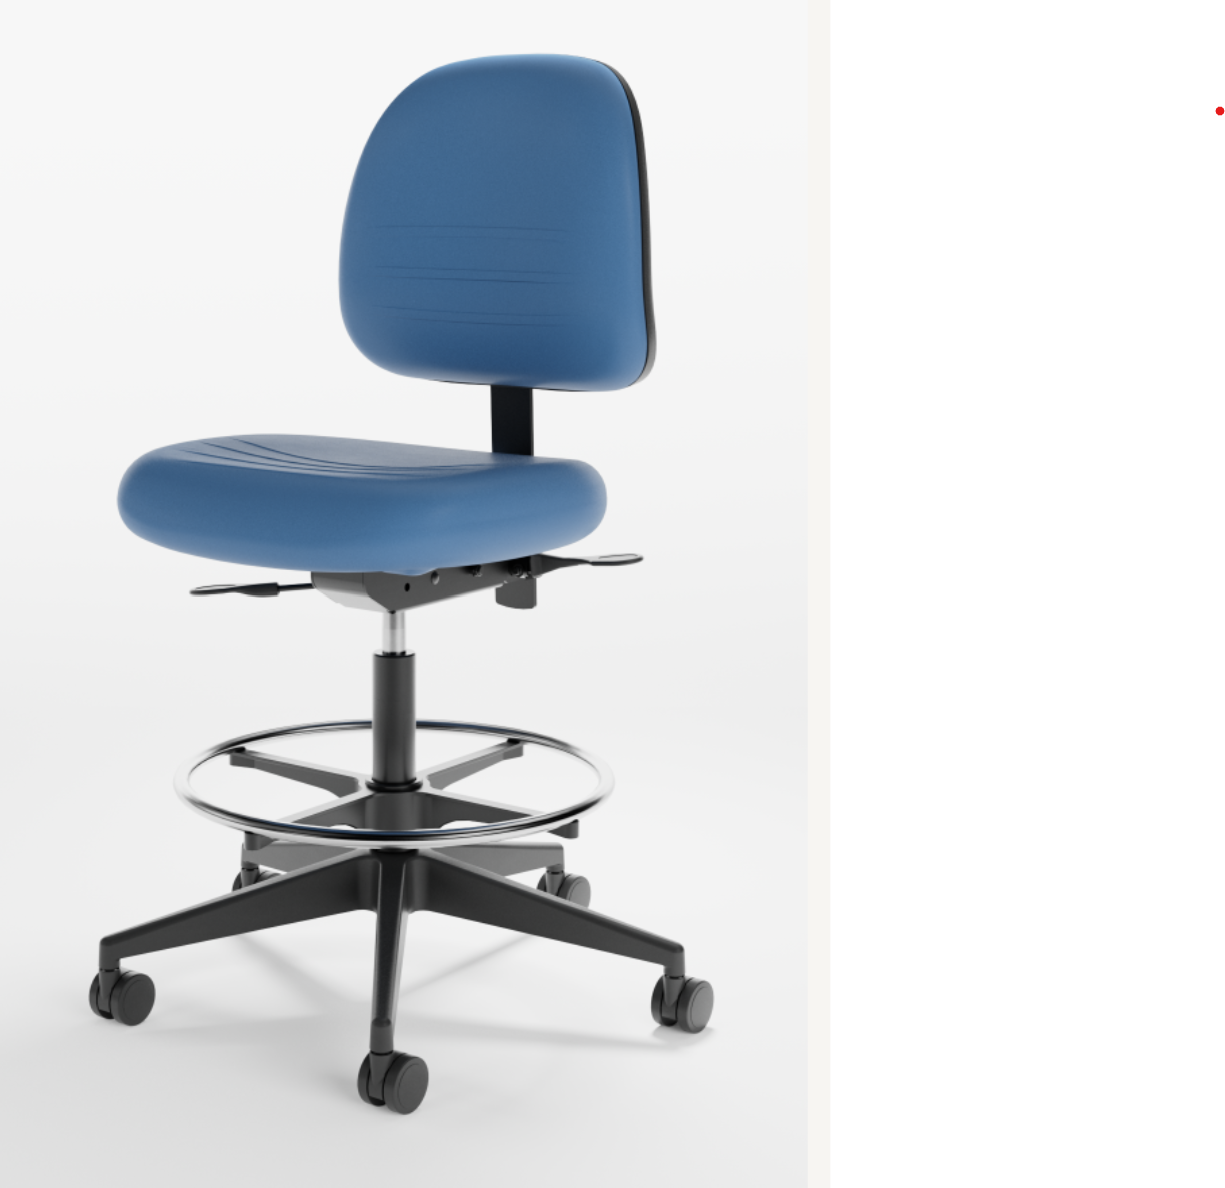 RPSM4 FUSION FIT R+ STOOL - DESK TO COUNTER - SMALL BACK, MID HEIGHT, 4-WAY MECH 262 : SKY R+ URETHANE COVER(S) 262 2 : UNIVERSAL DUAL WHEEL T :  NO ARMS: L CYLINDER DESK TO COUNTER (17.5"-25")